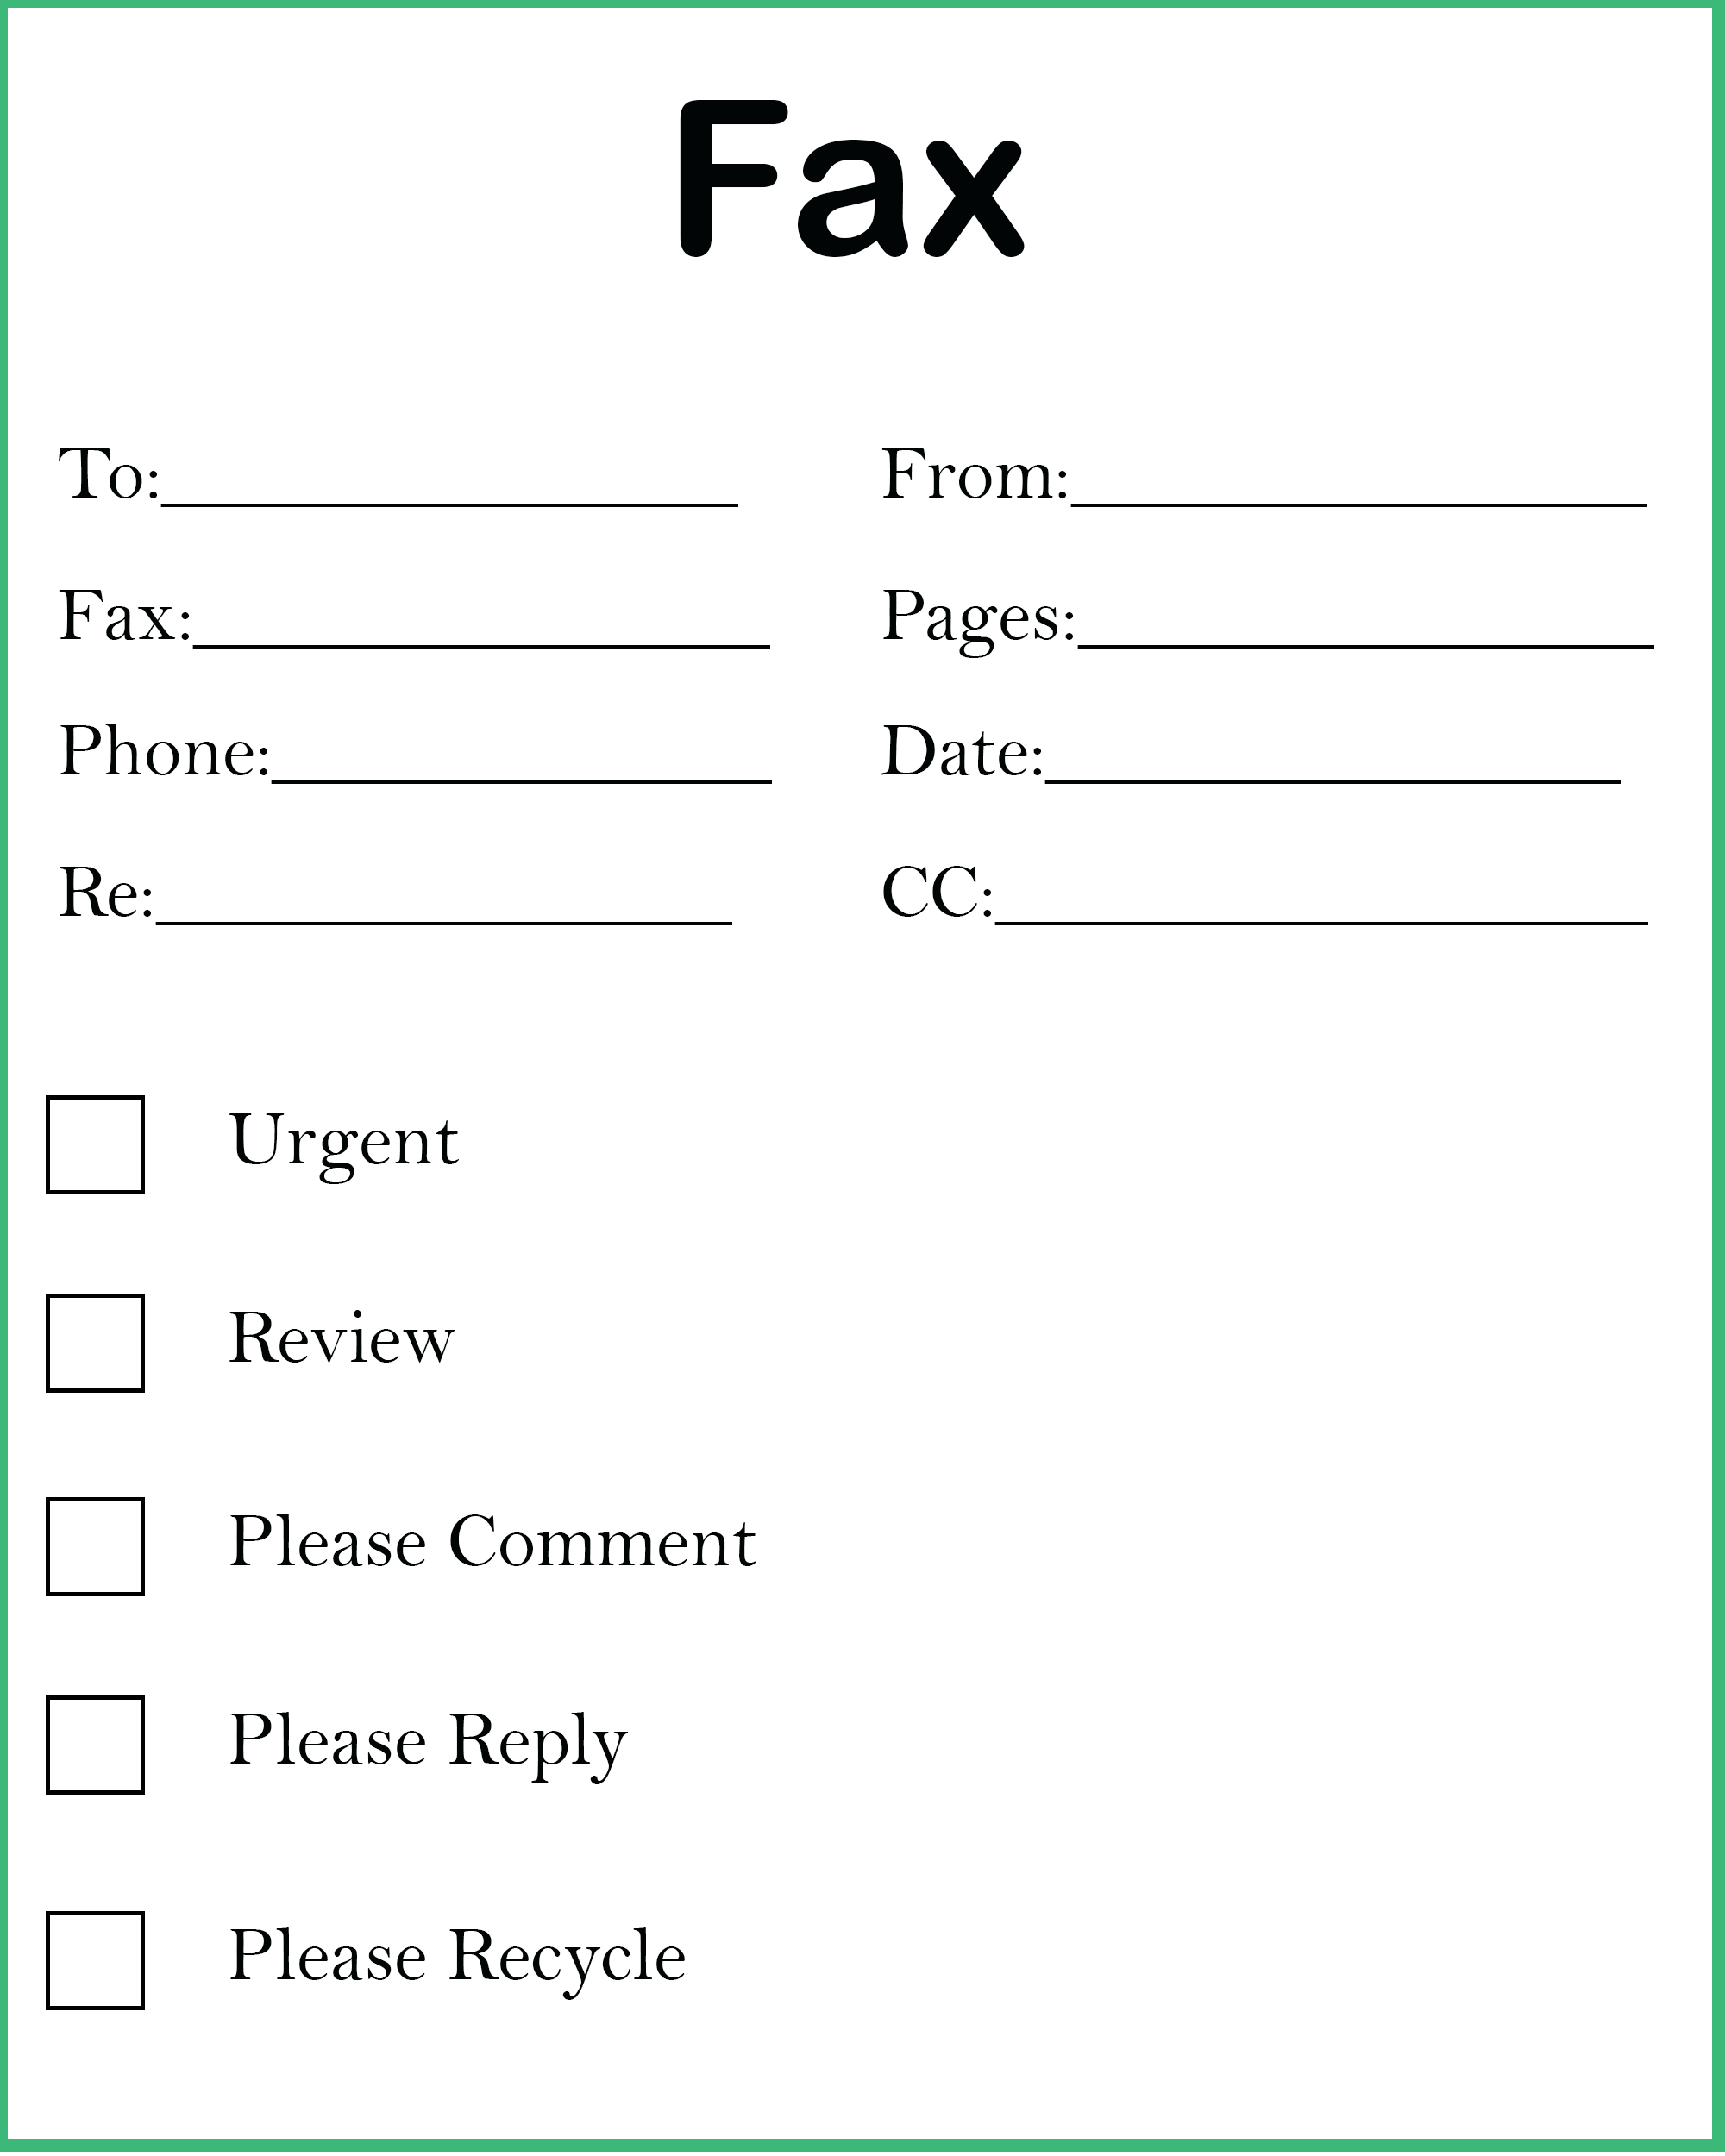 Fax Cover Sheet Excel Fax Cover Sheet Template